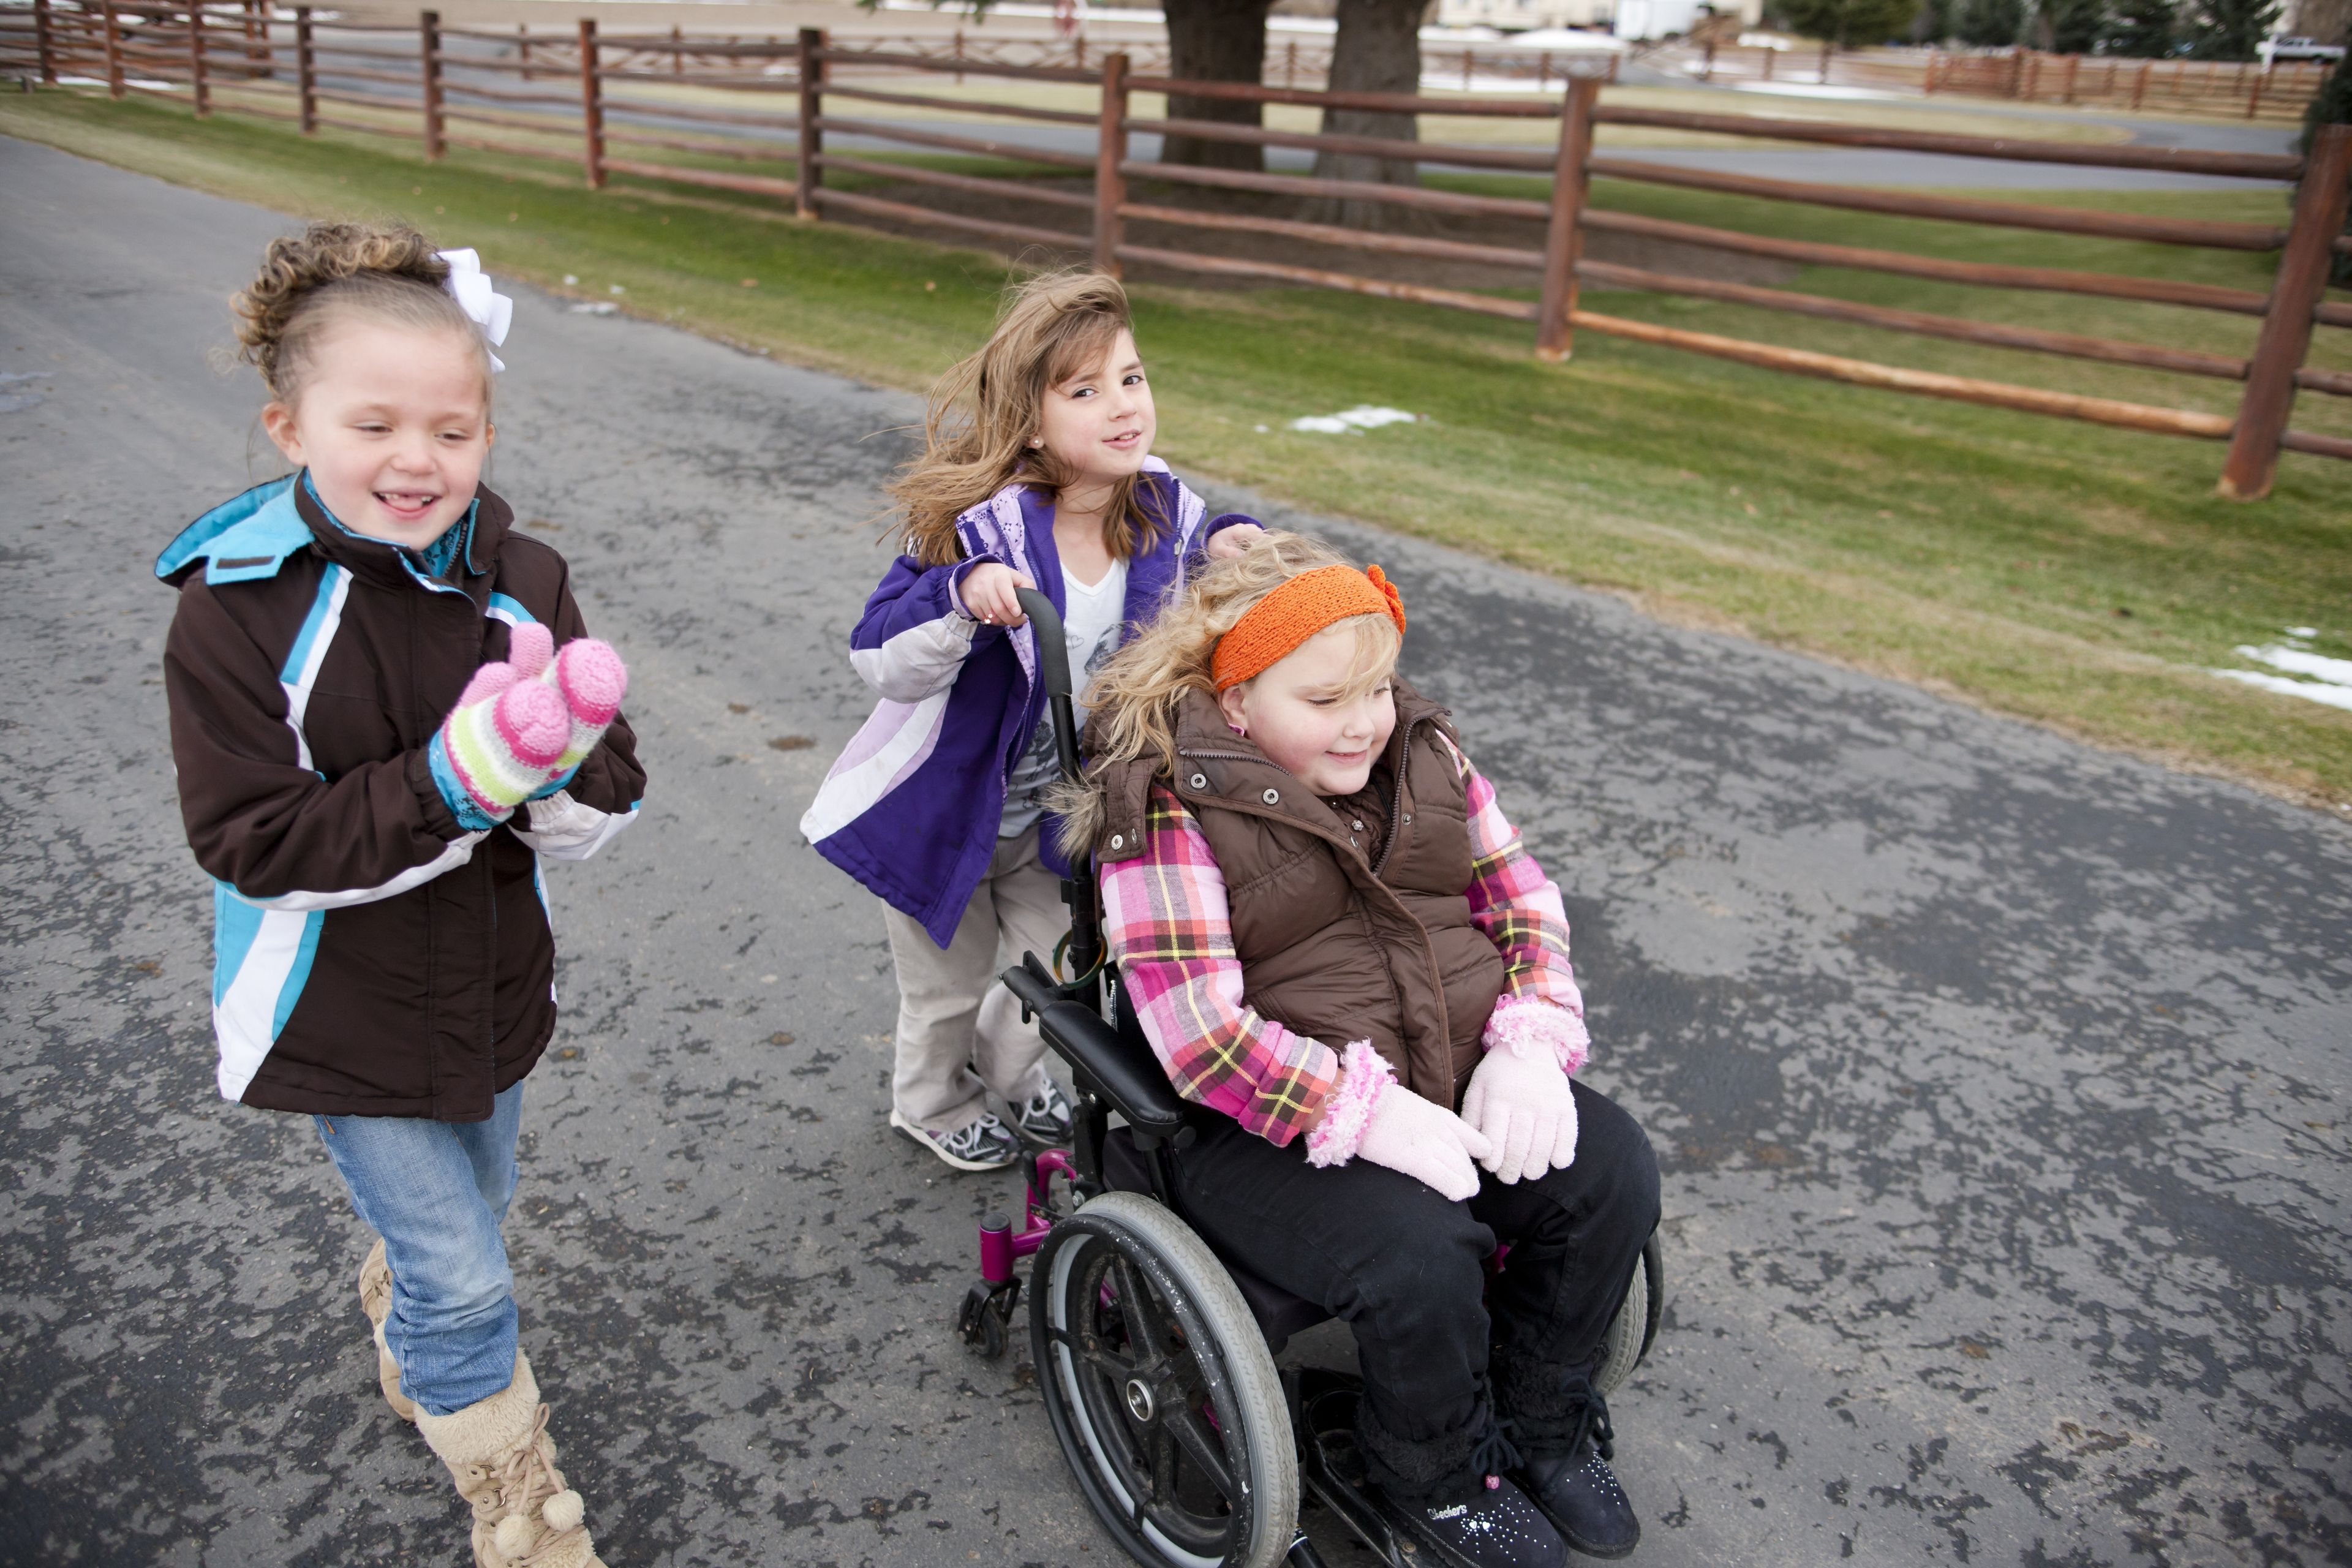 Two girls walk together while one pushes a third girl in a wheelchair.